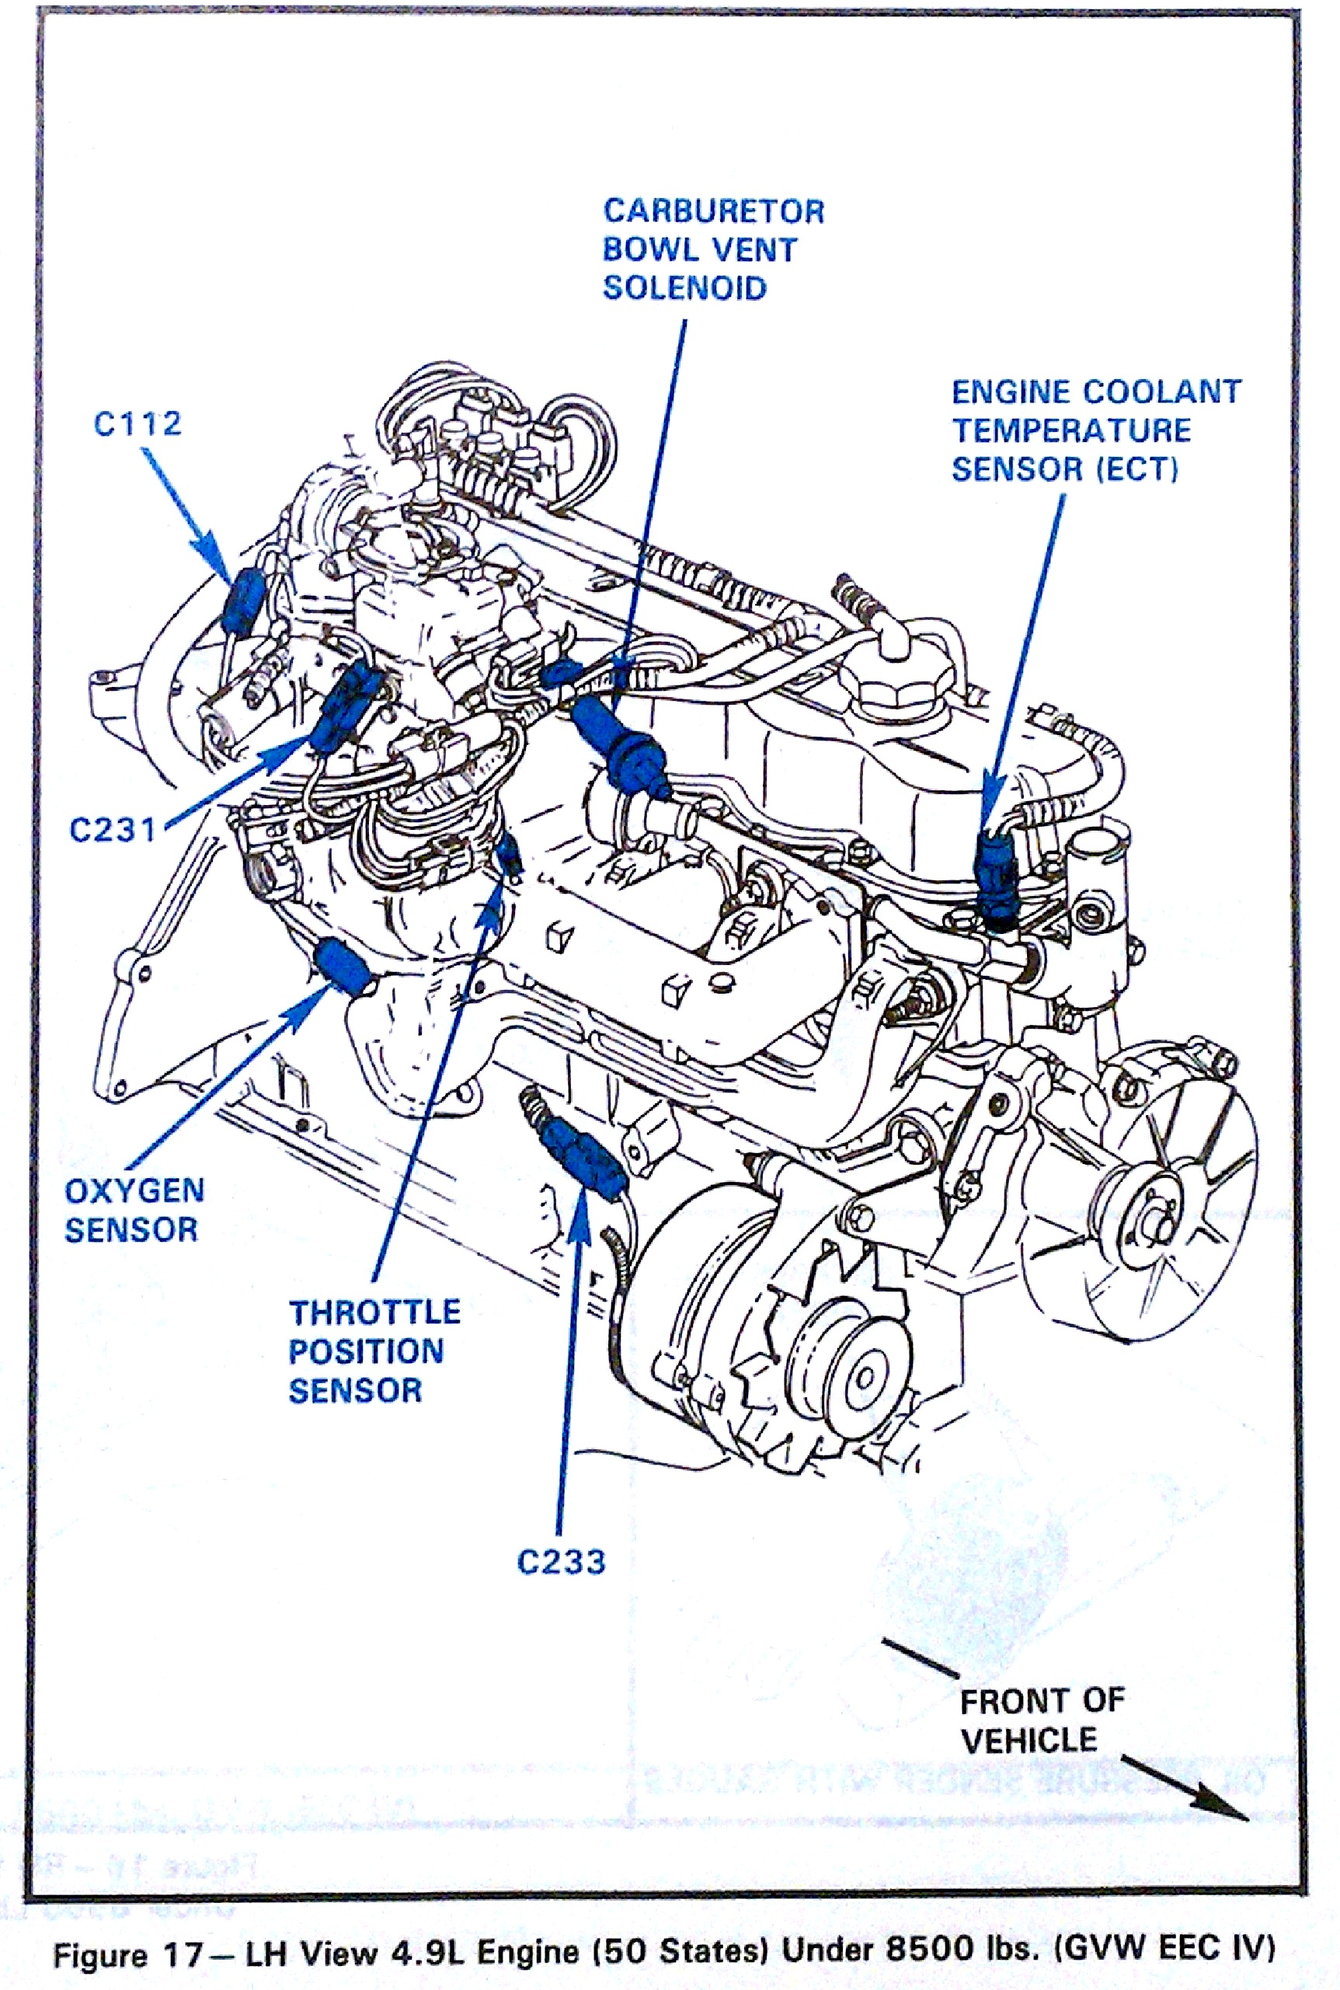 1985 ford f150 300 inline 6 smog help - Ford Truck ... wiring schematic 1986 f 250 